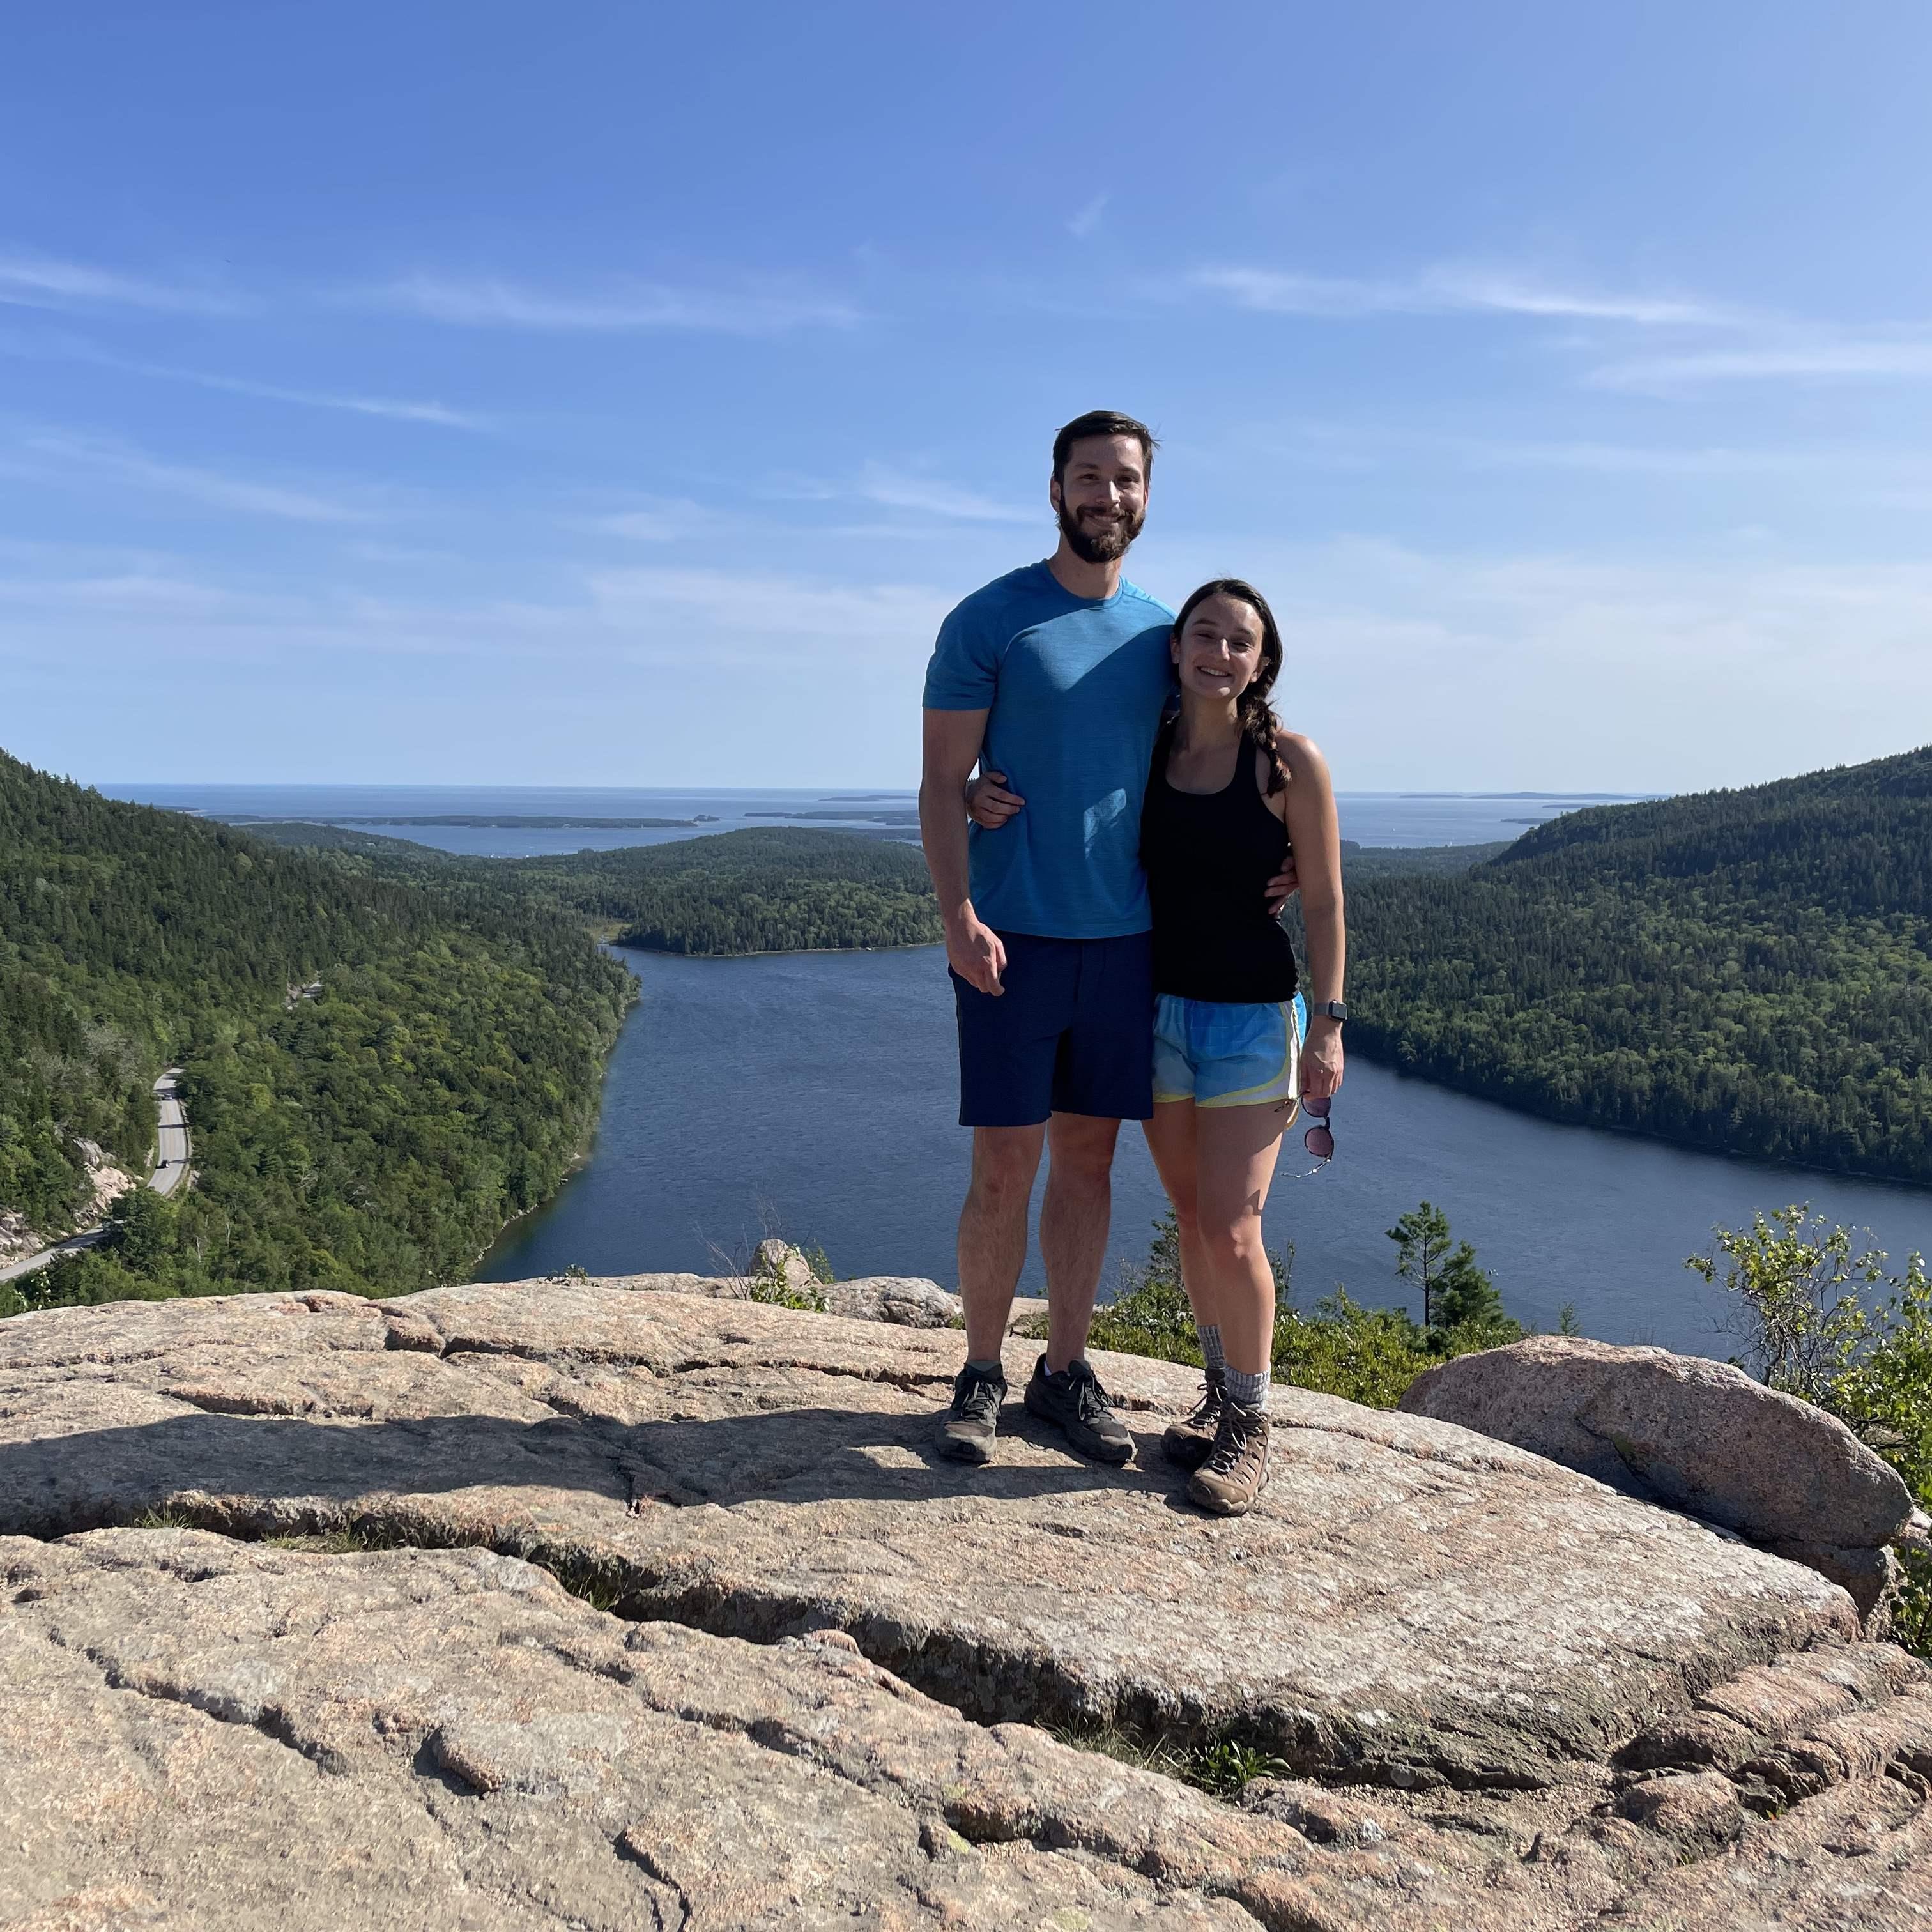 August 2021 - Hiking in Acadia National Park in Maine.